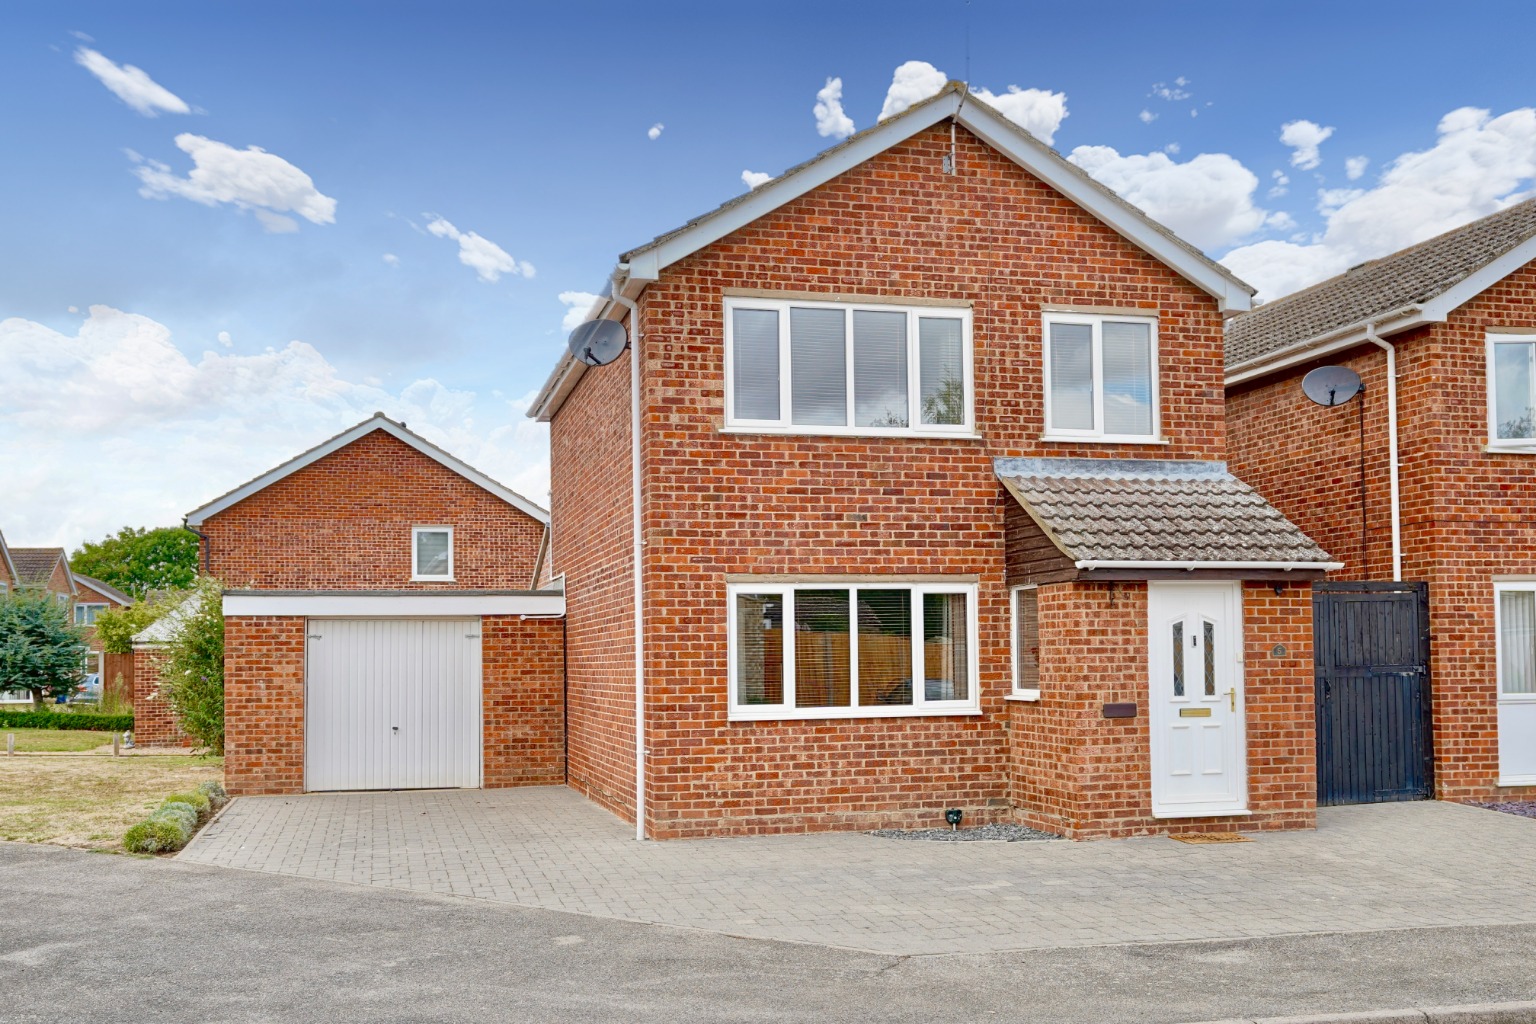 4 bed detached house for sale in Robert Avenue, Huntingdon  - Property Image 1